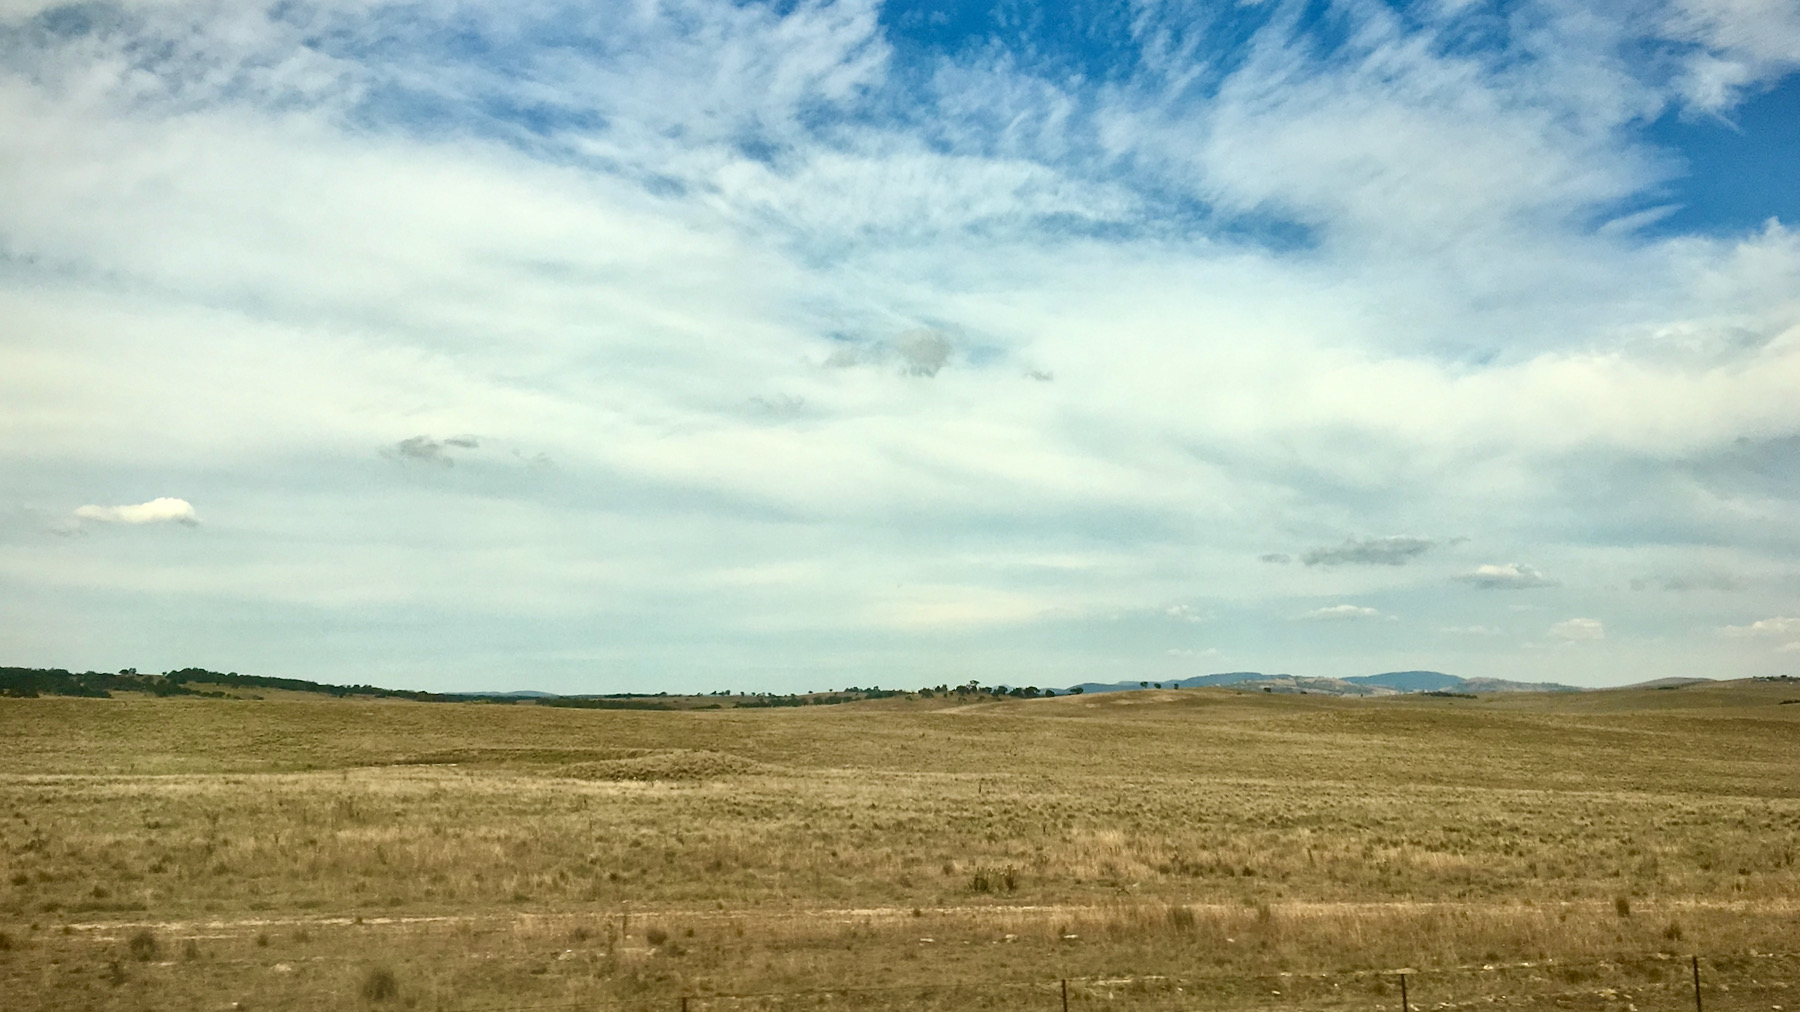 Returning from Canberra, 15 April 2016